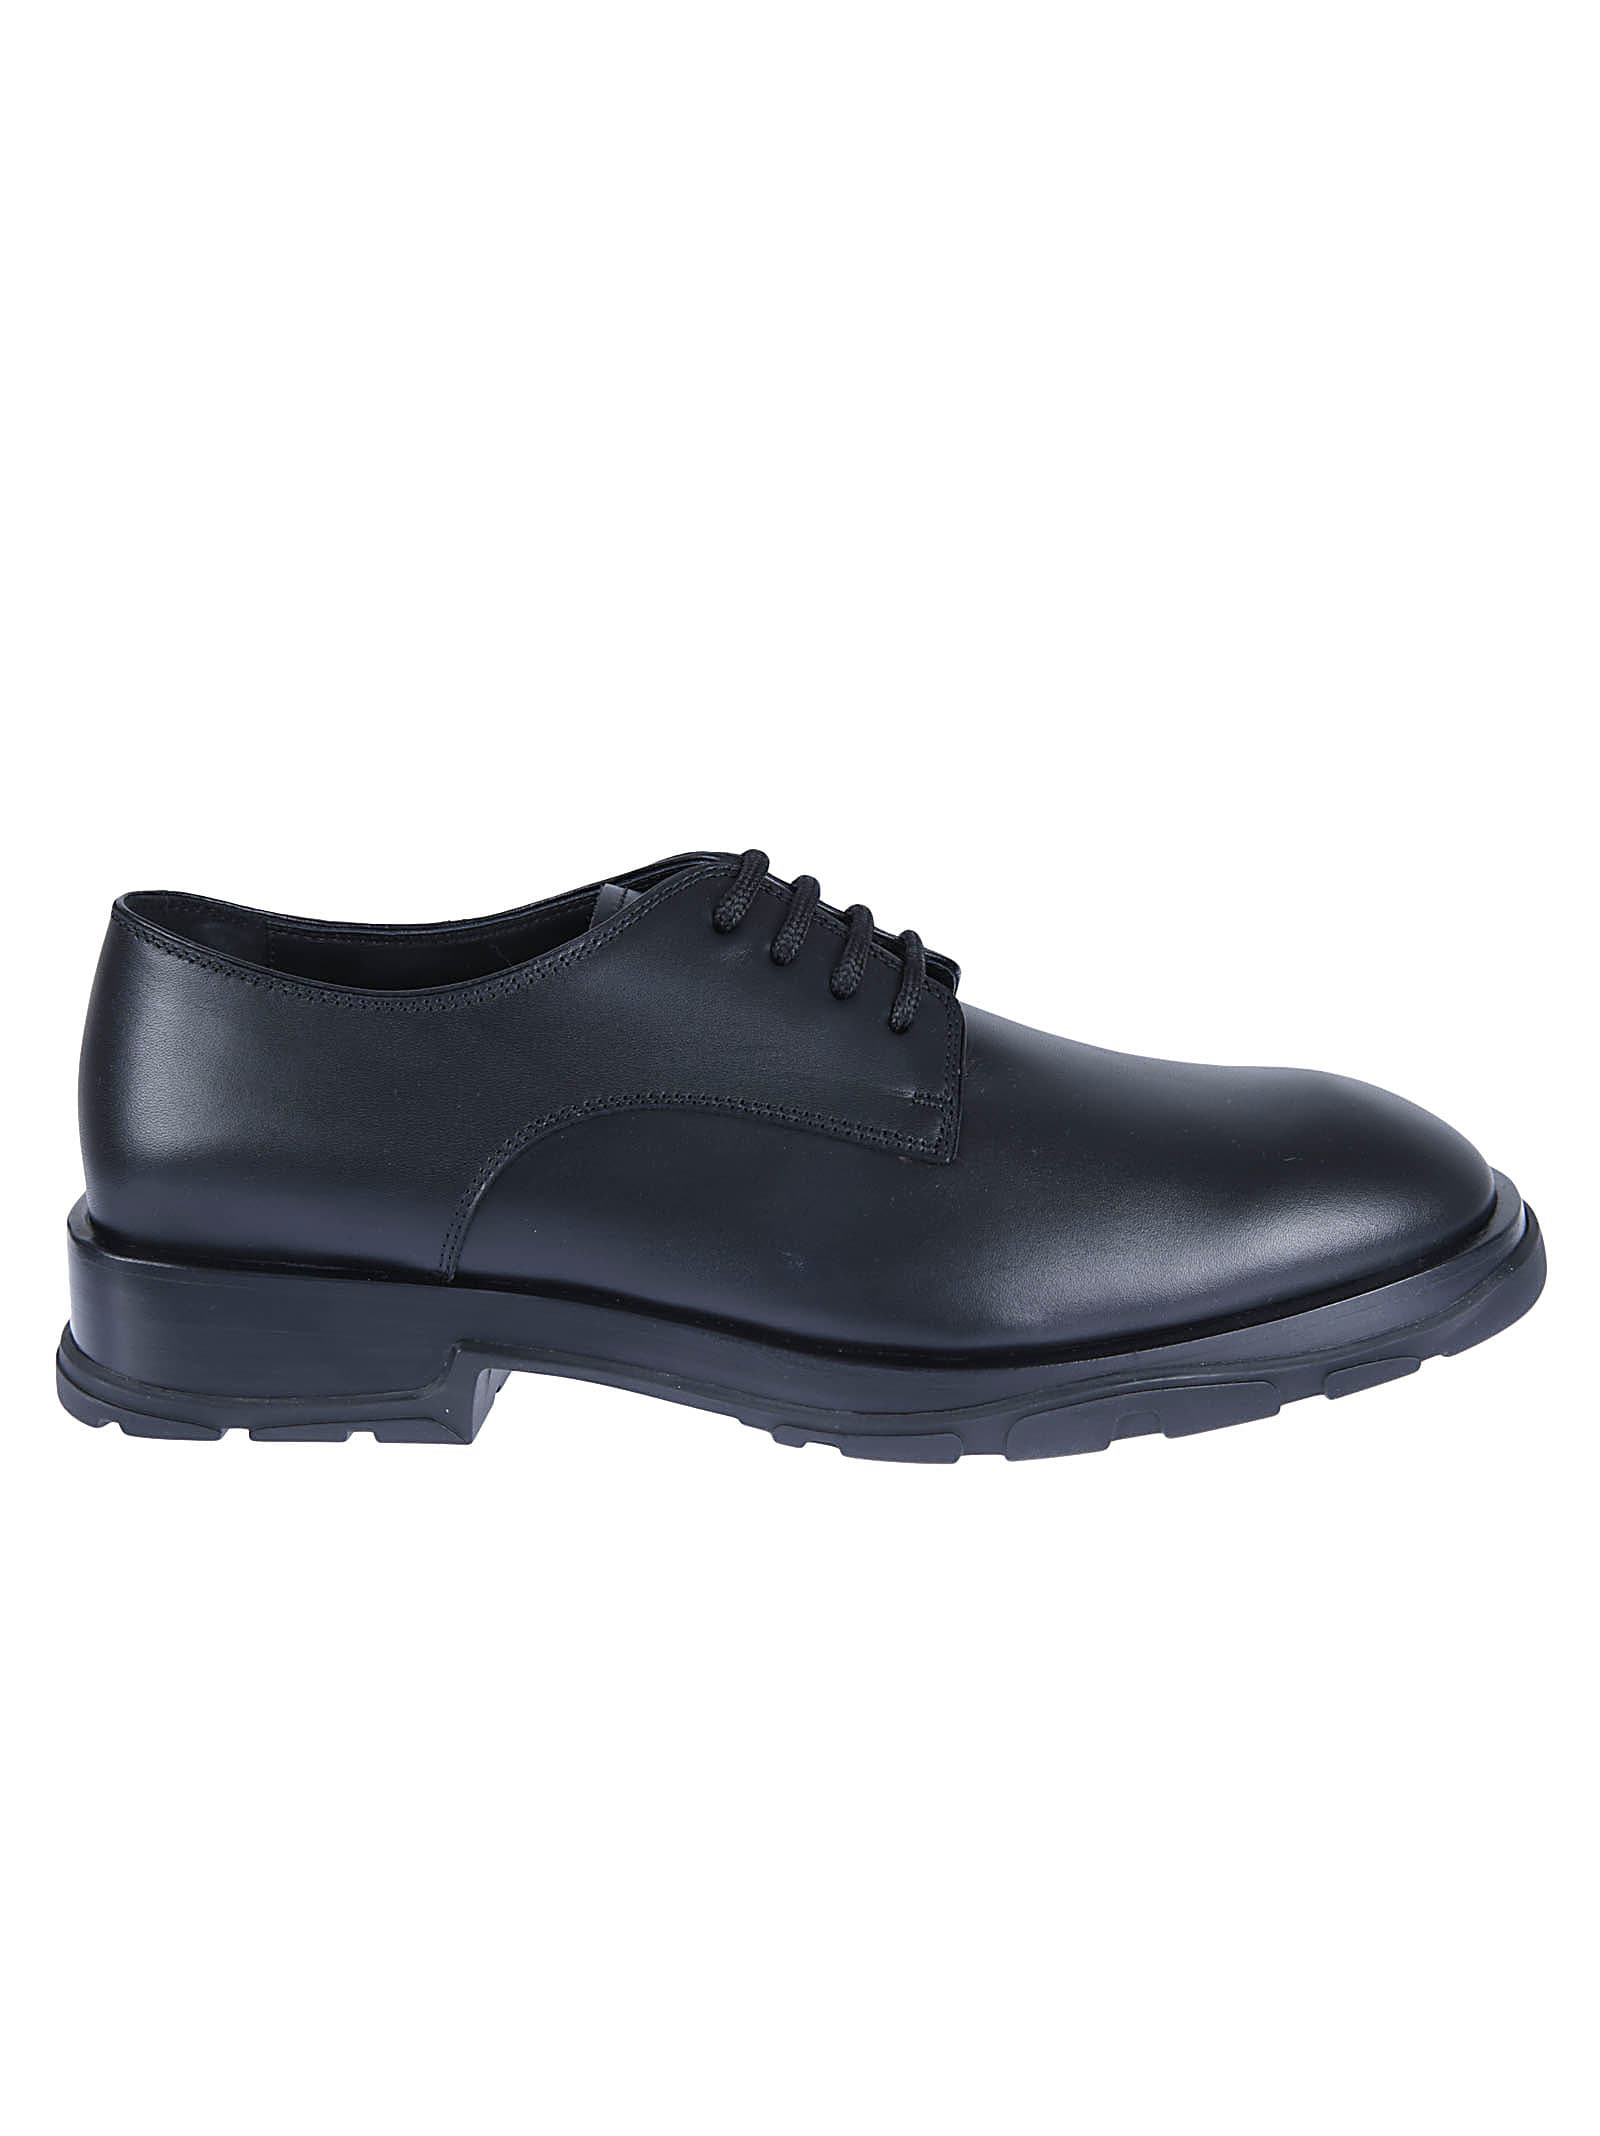 Alexander McQueen Classic Oxford Shoes